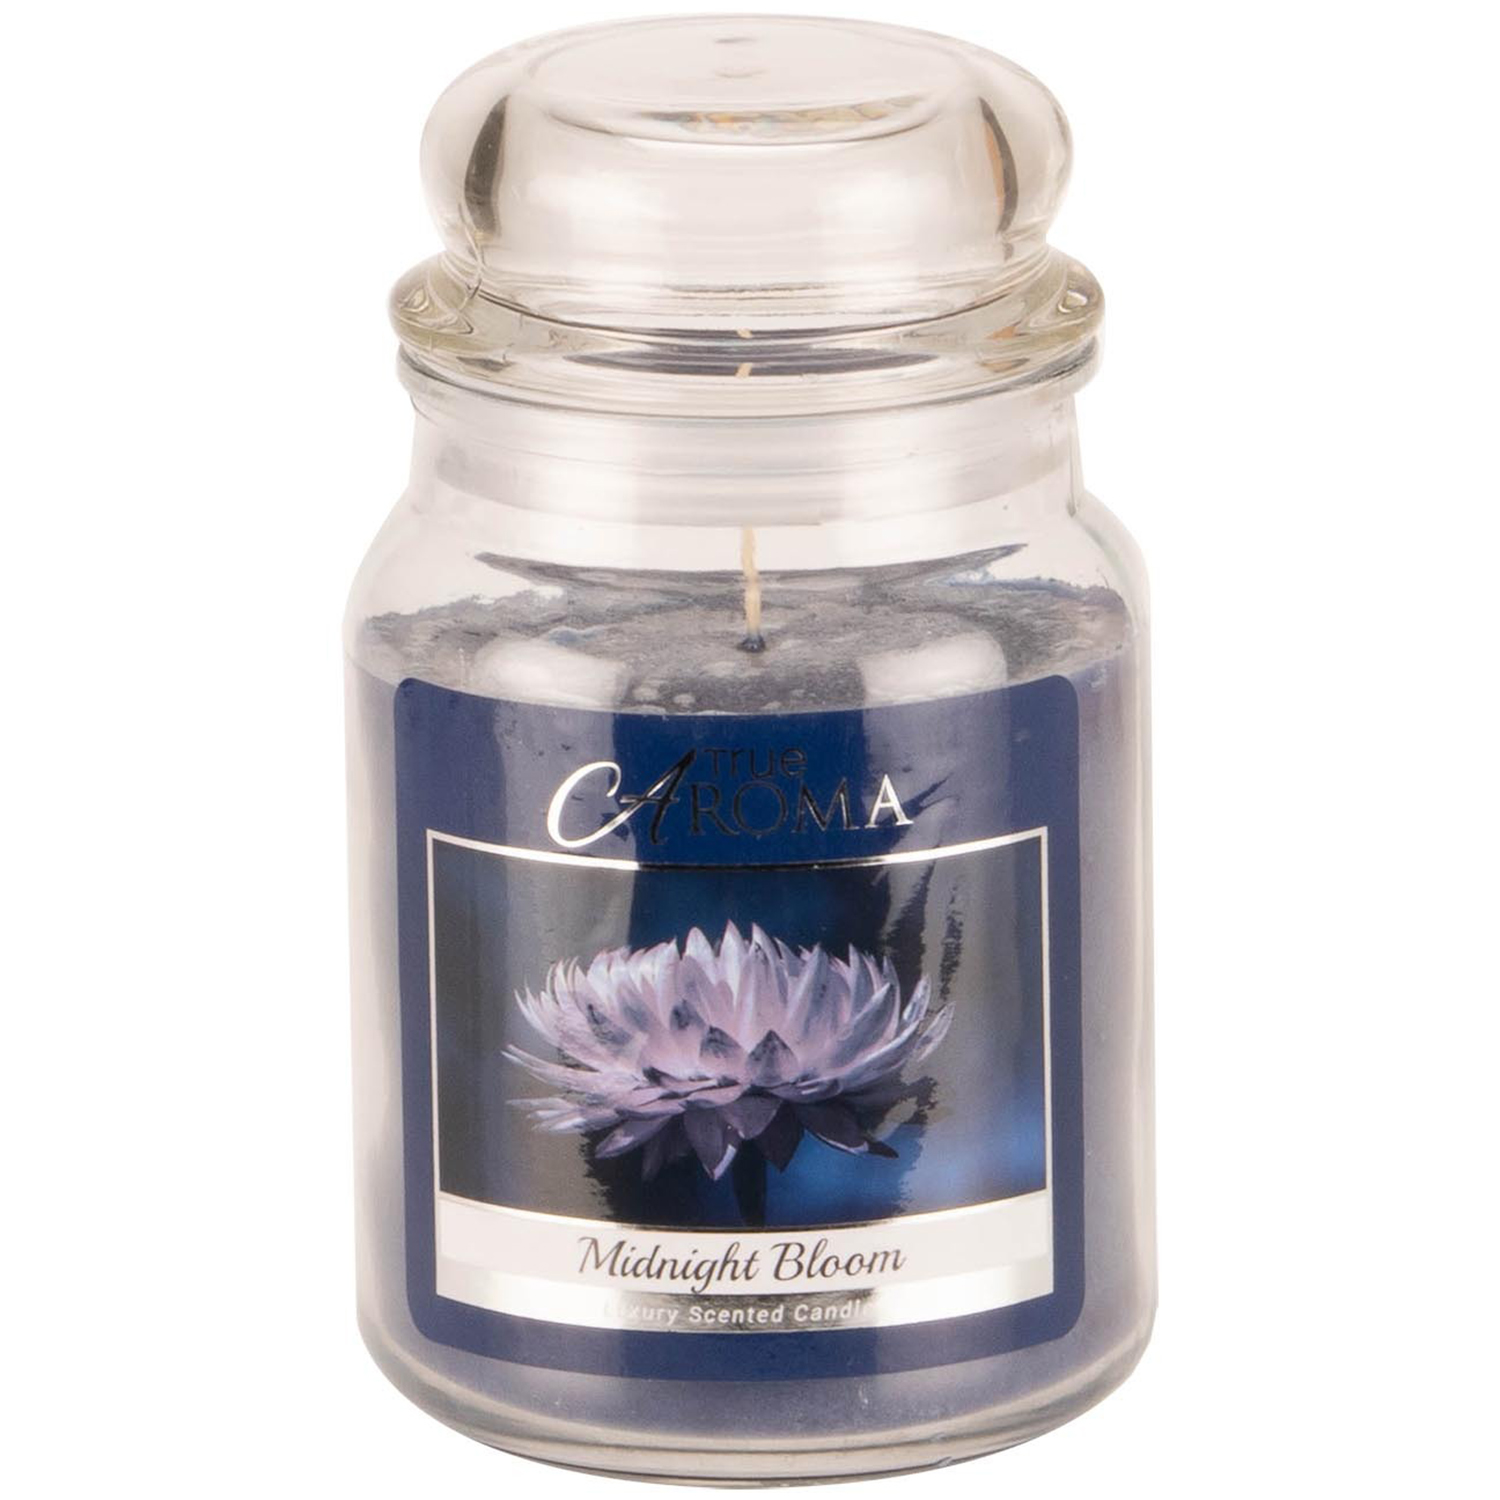 True Aroma Midnight Bloom Large Jar Scented Candle Image